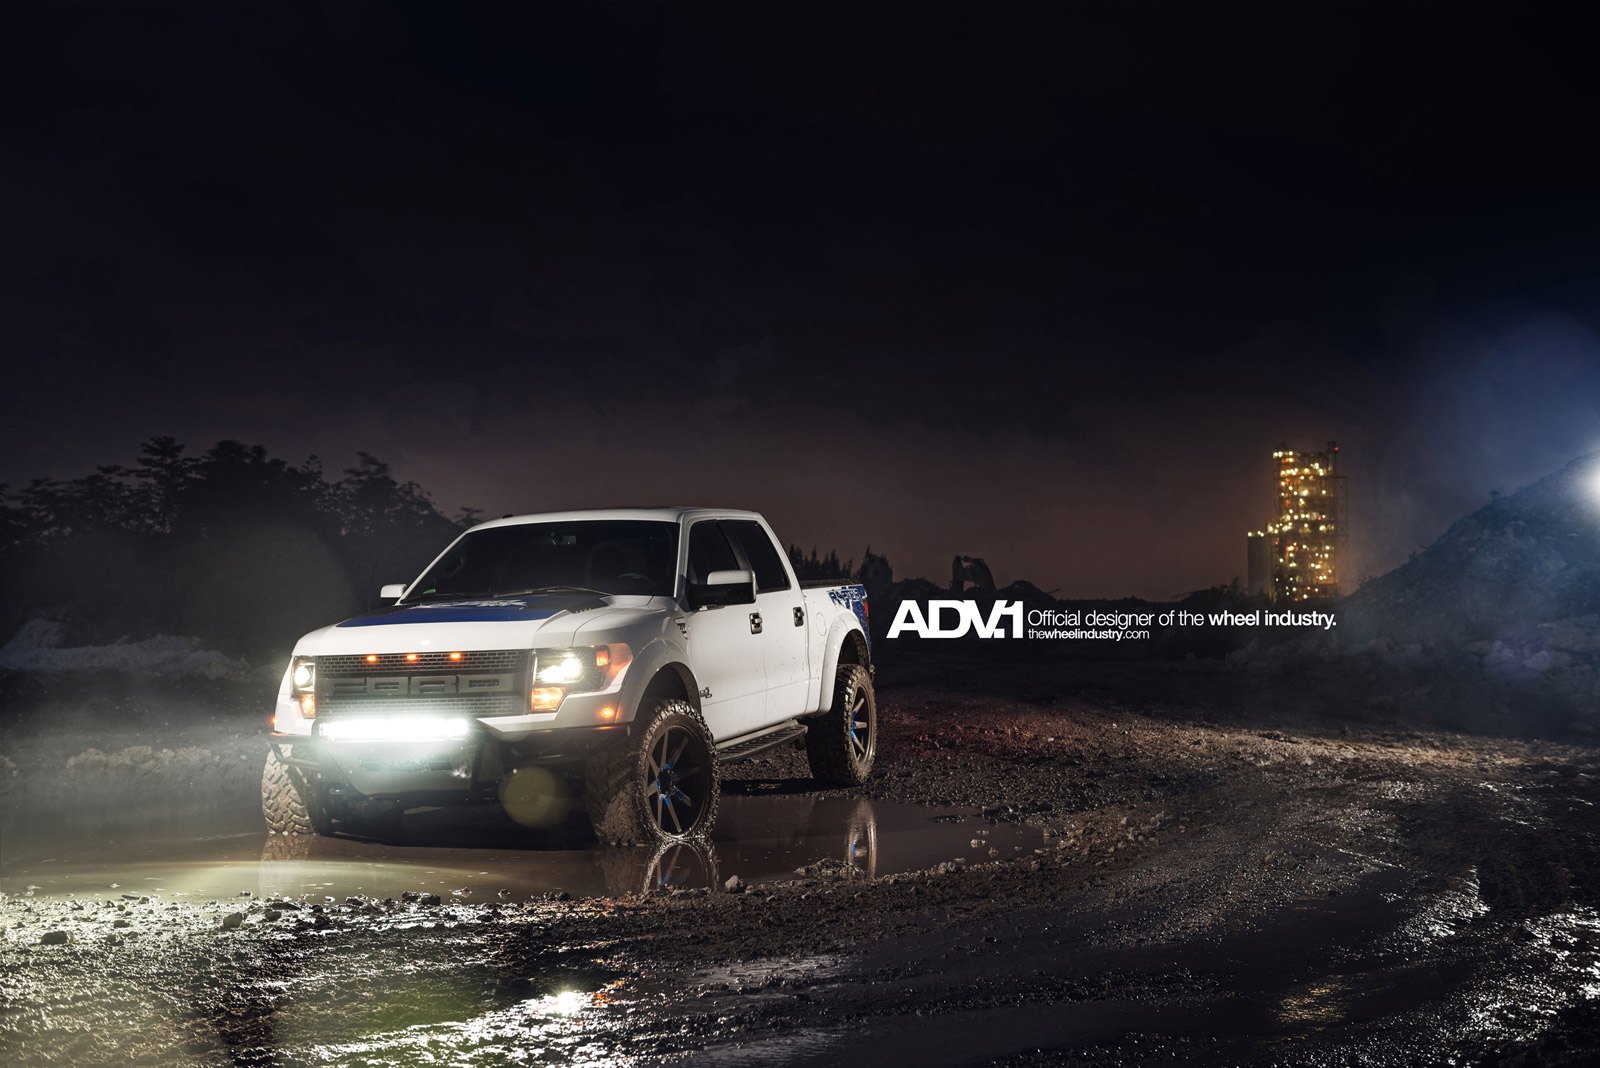 White Ford F-150 with Custom LED Headlights - Photo by ADV.1